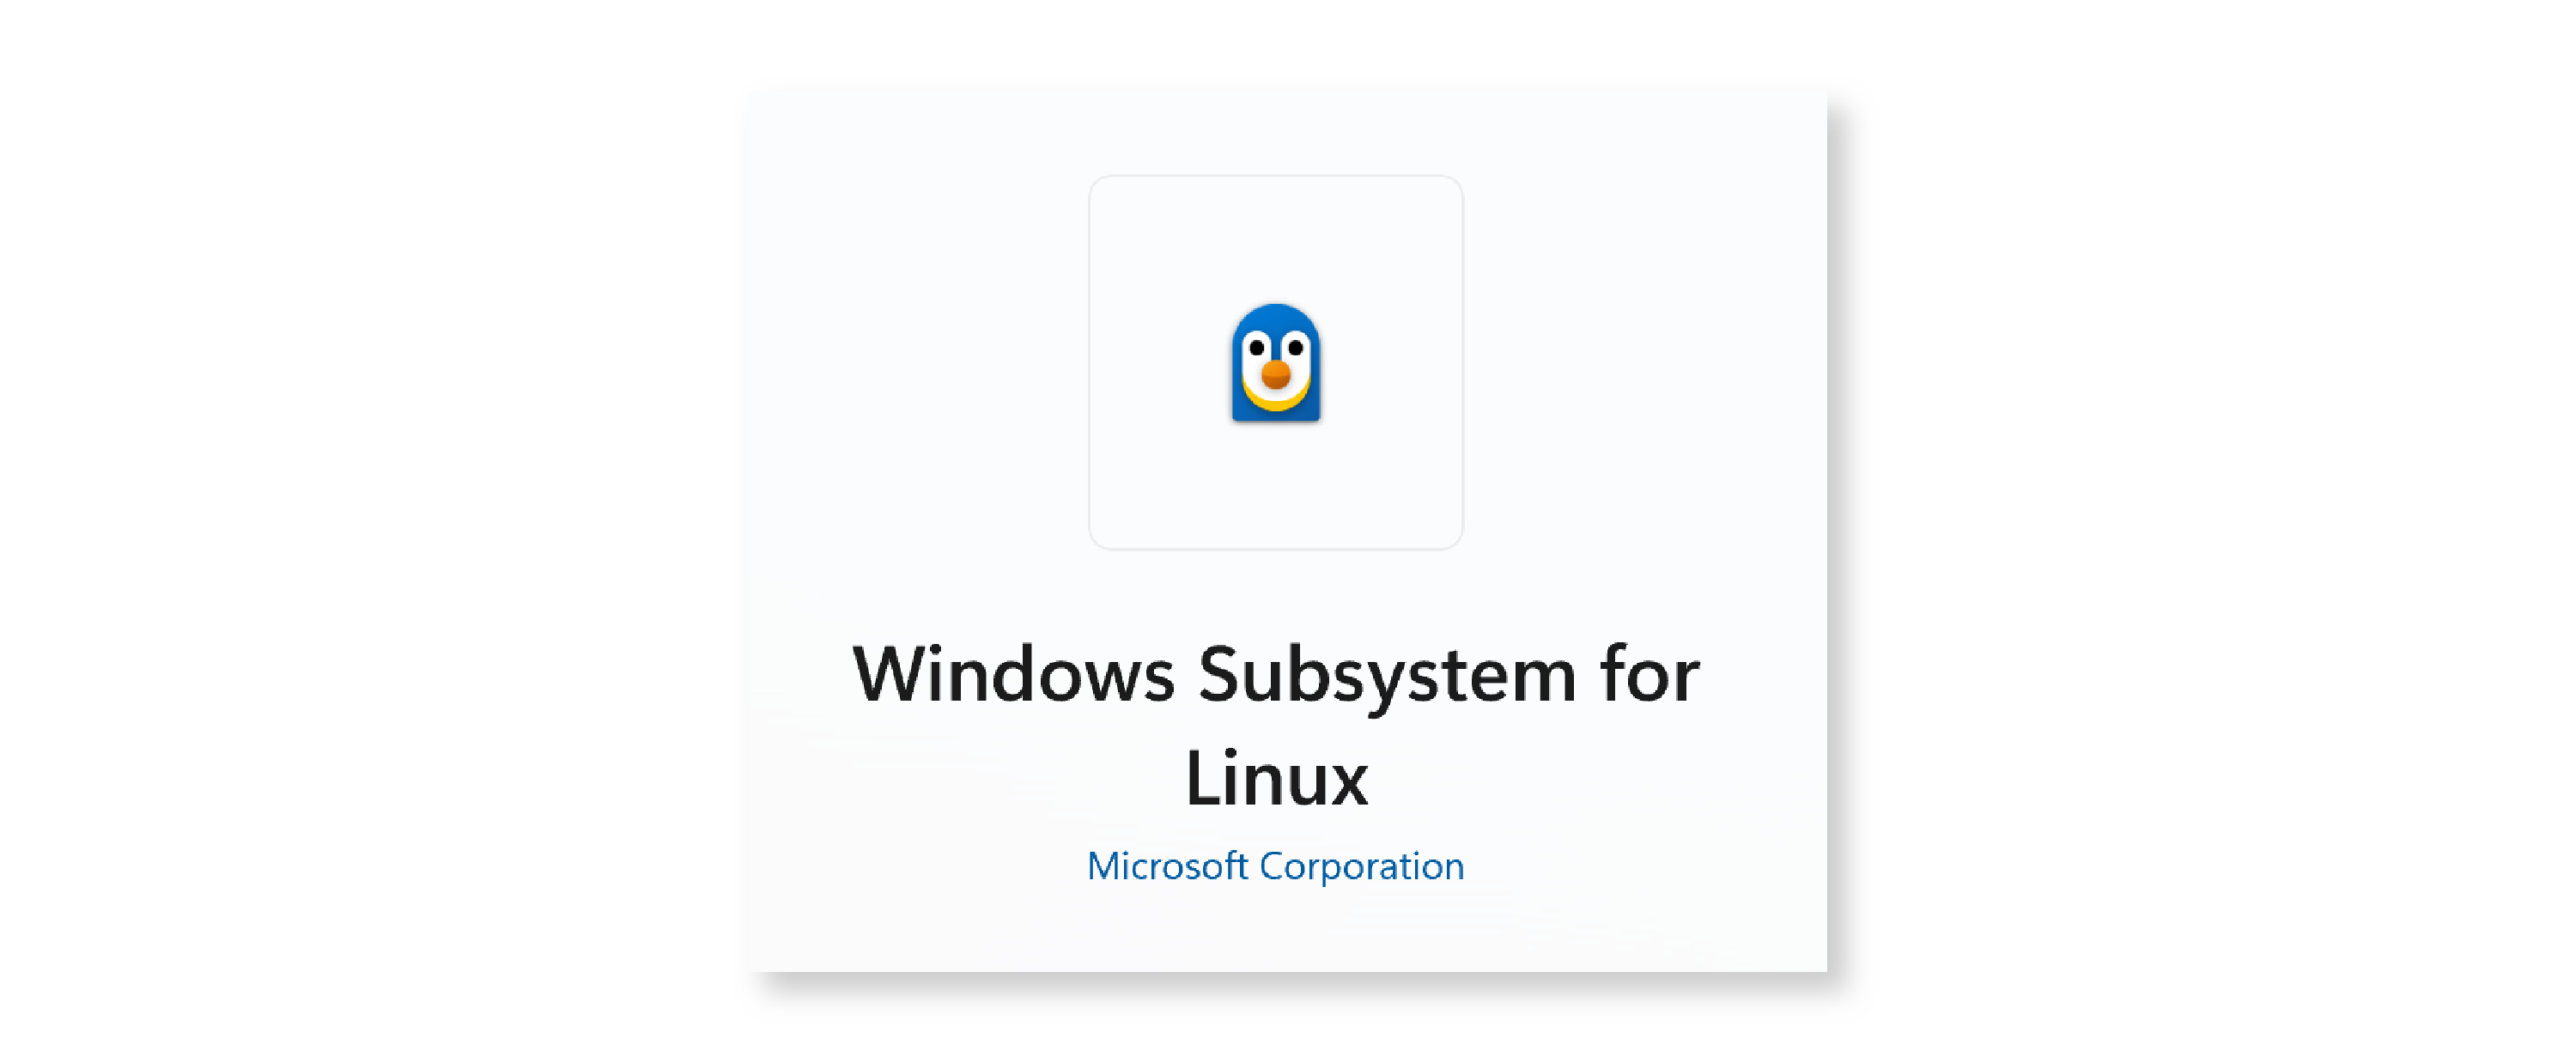 Screenshot of the "Windows Subsystem for Linux" app in the Microsoft store.